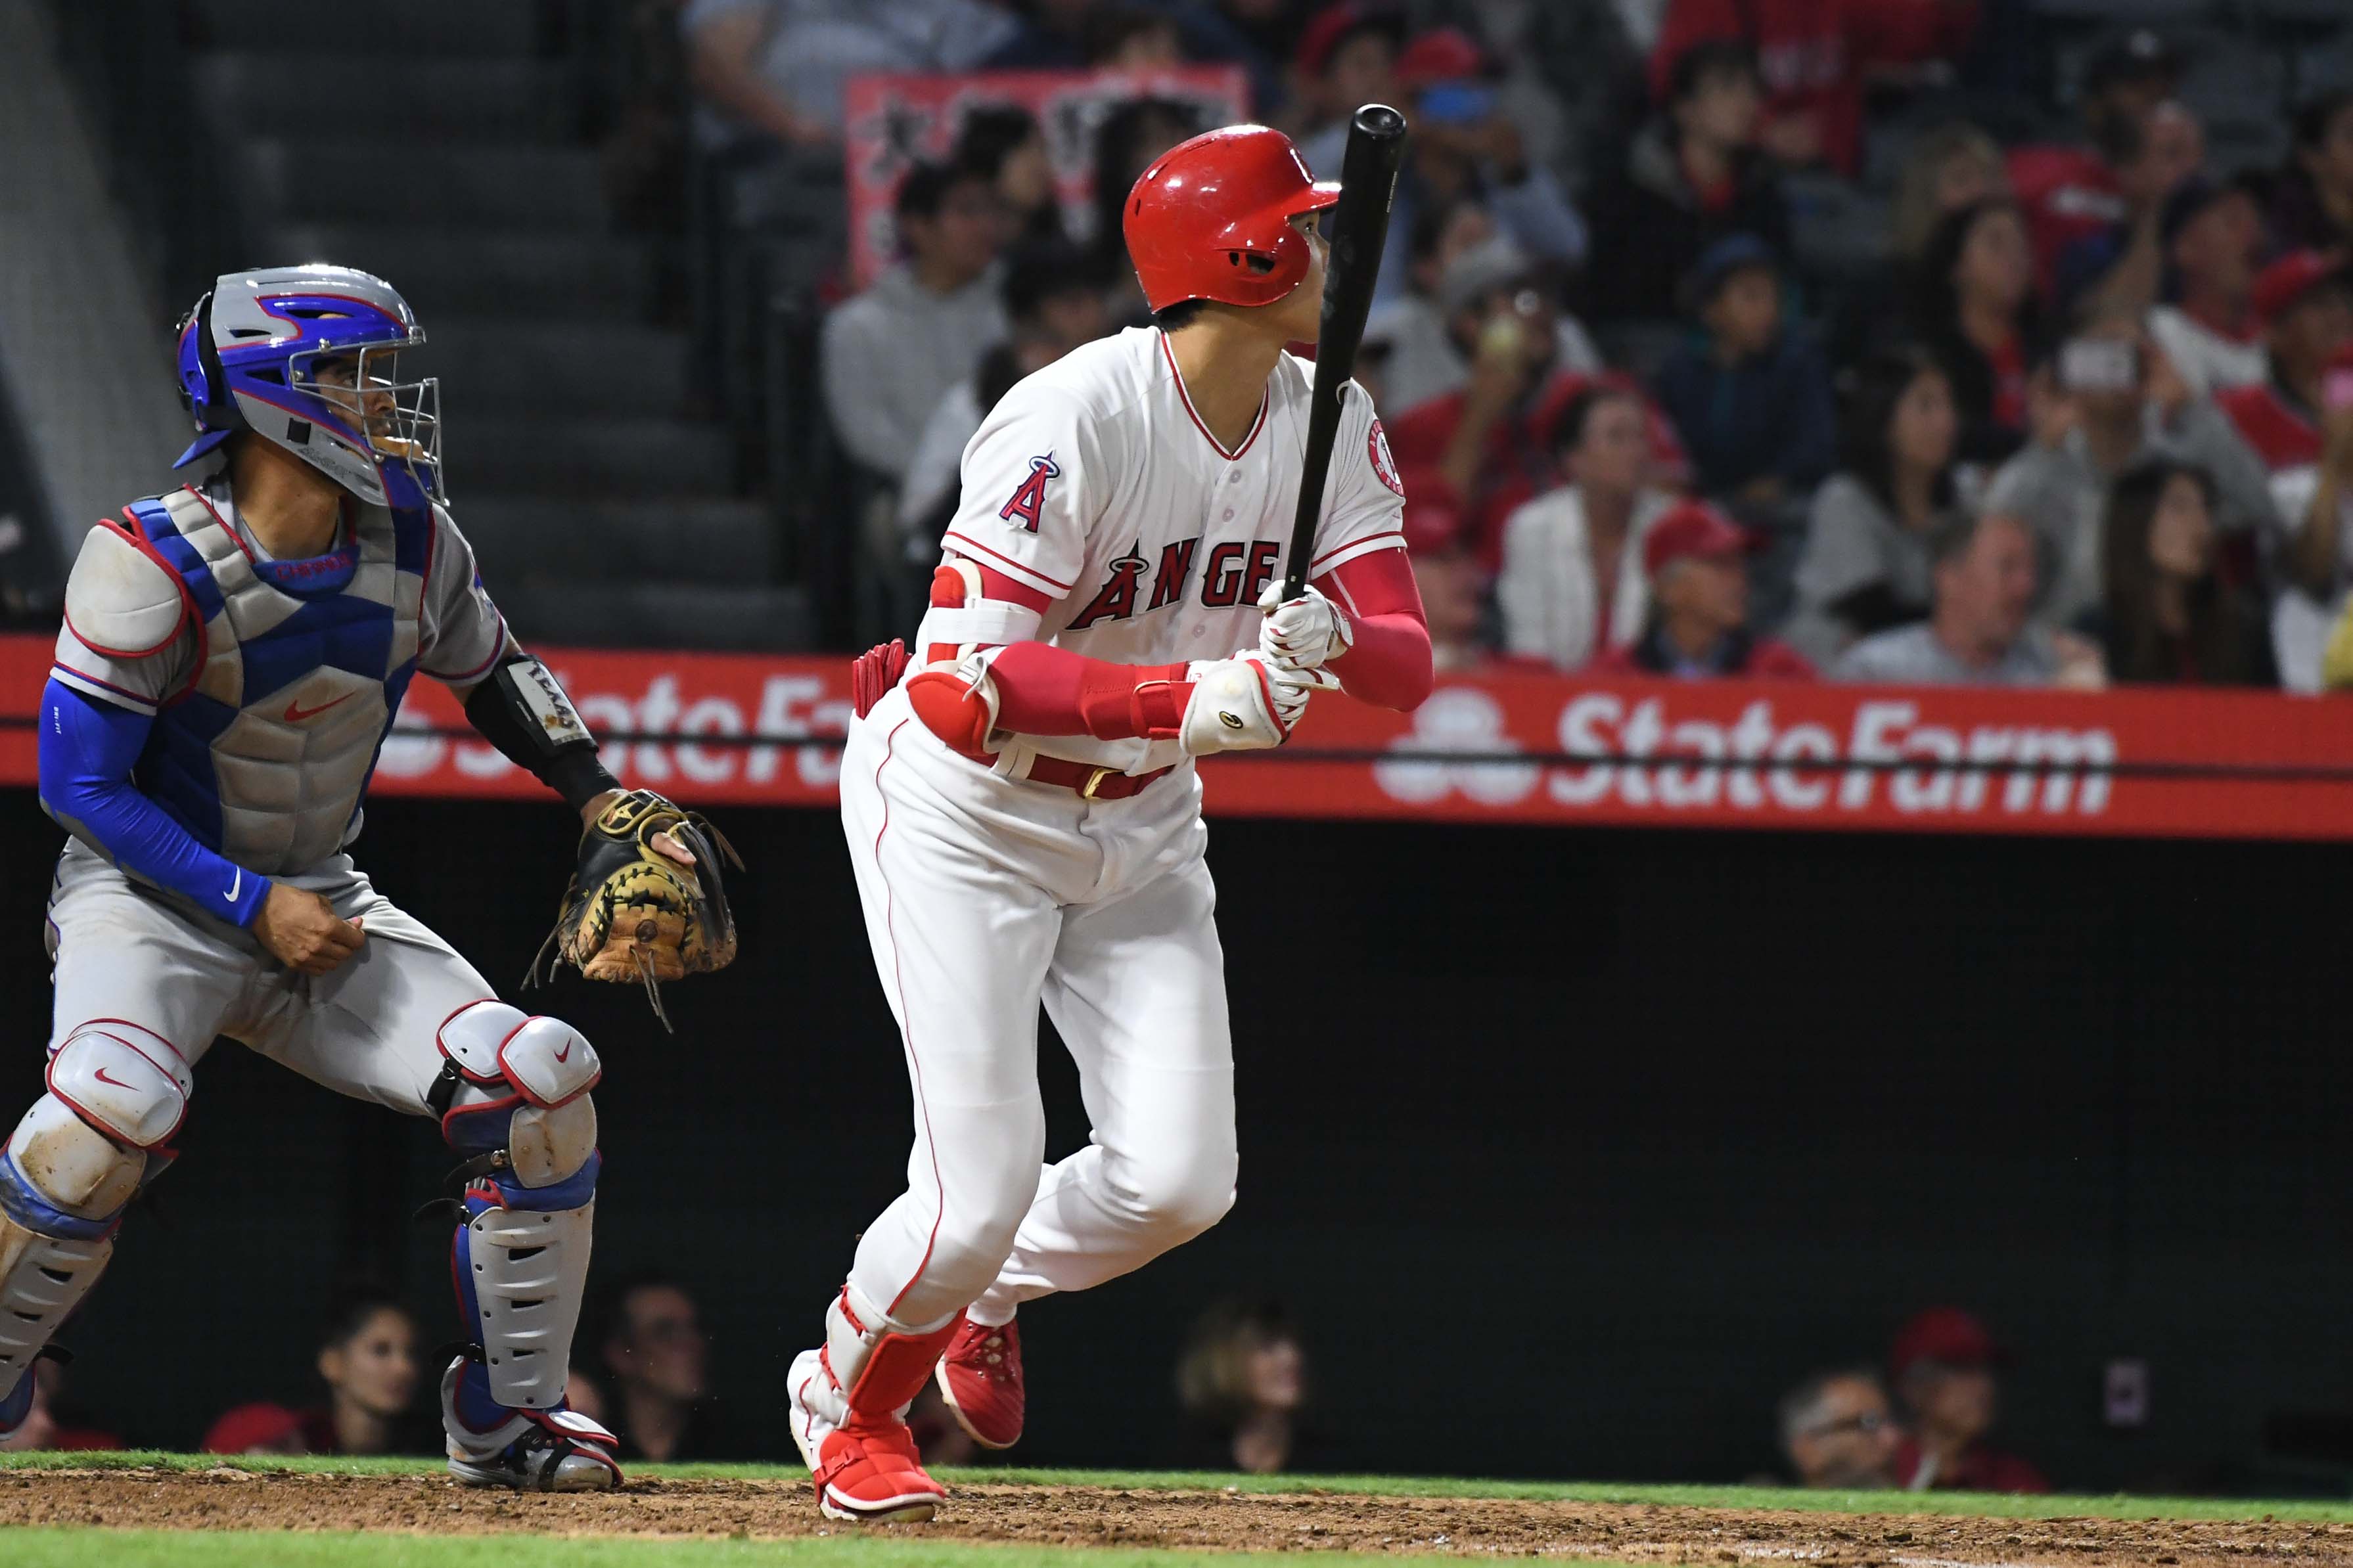 Ohtani's 8th-inning HR sends Angels to sweep of Rangers, 3-2